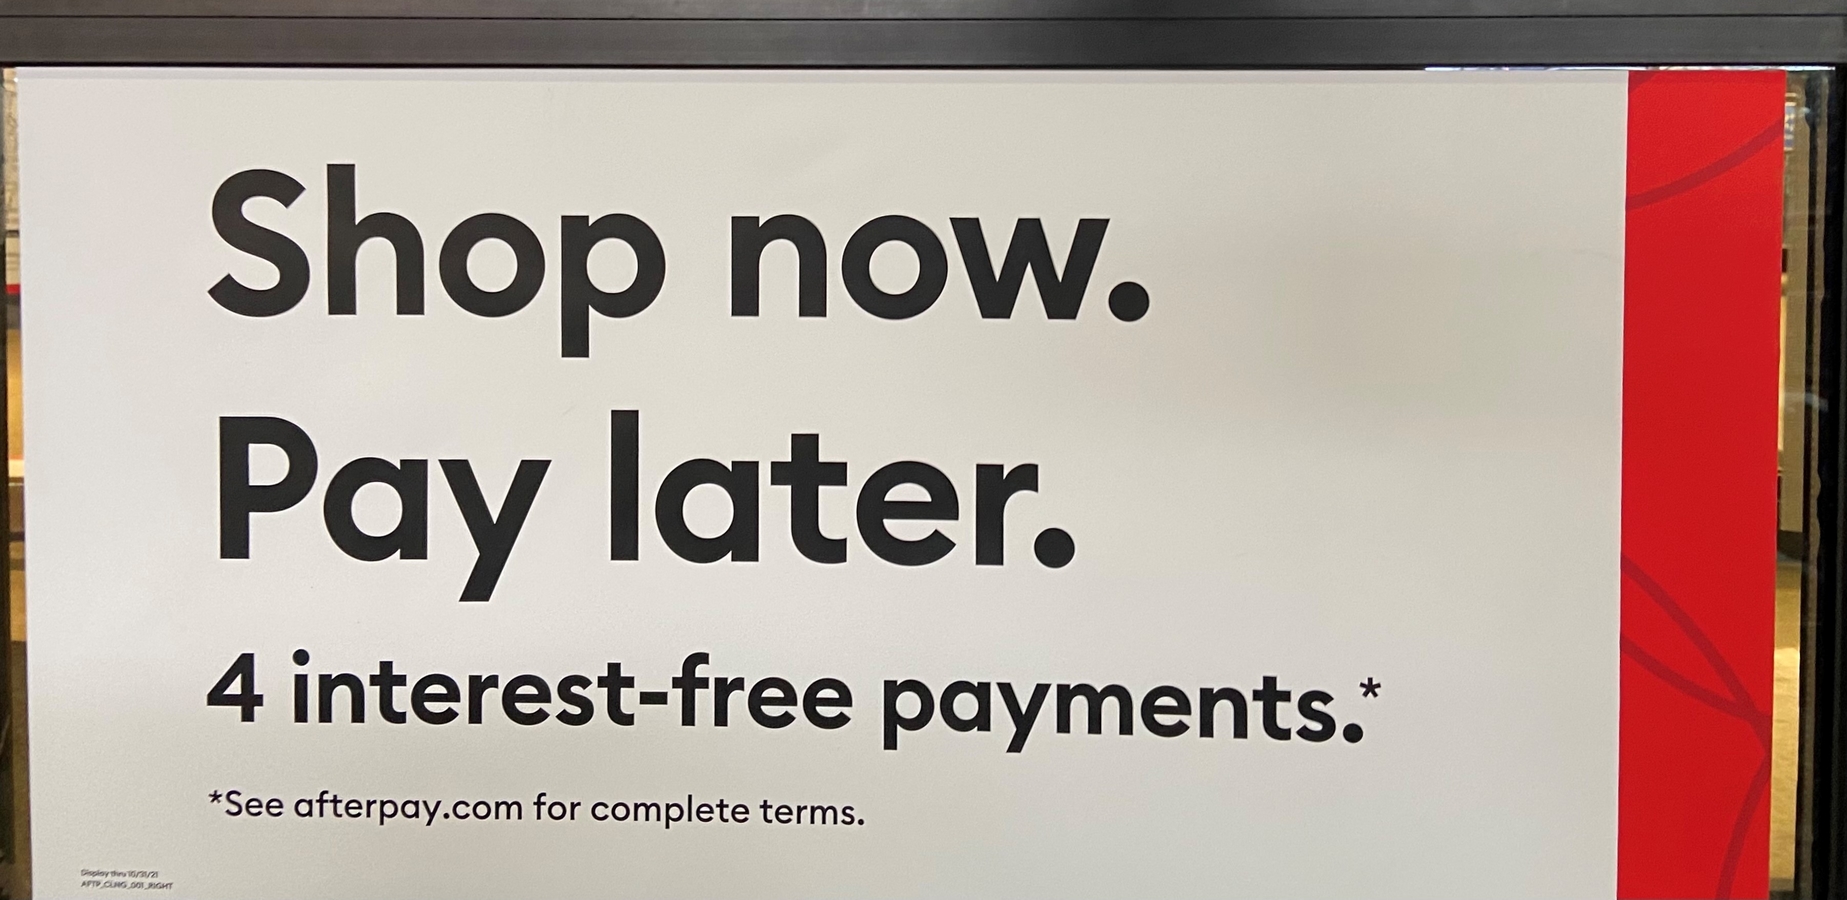 Buy now, pay later customers unaware of debt risks, warns Which